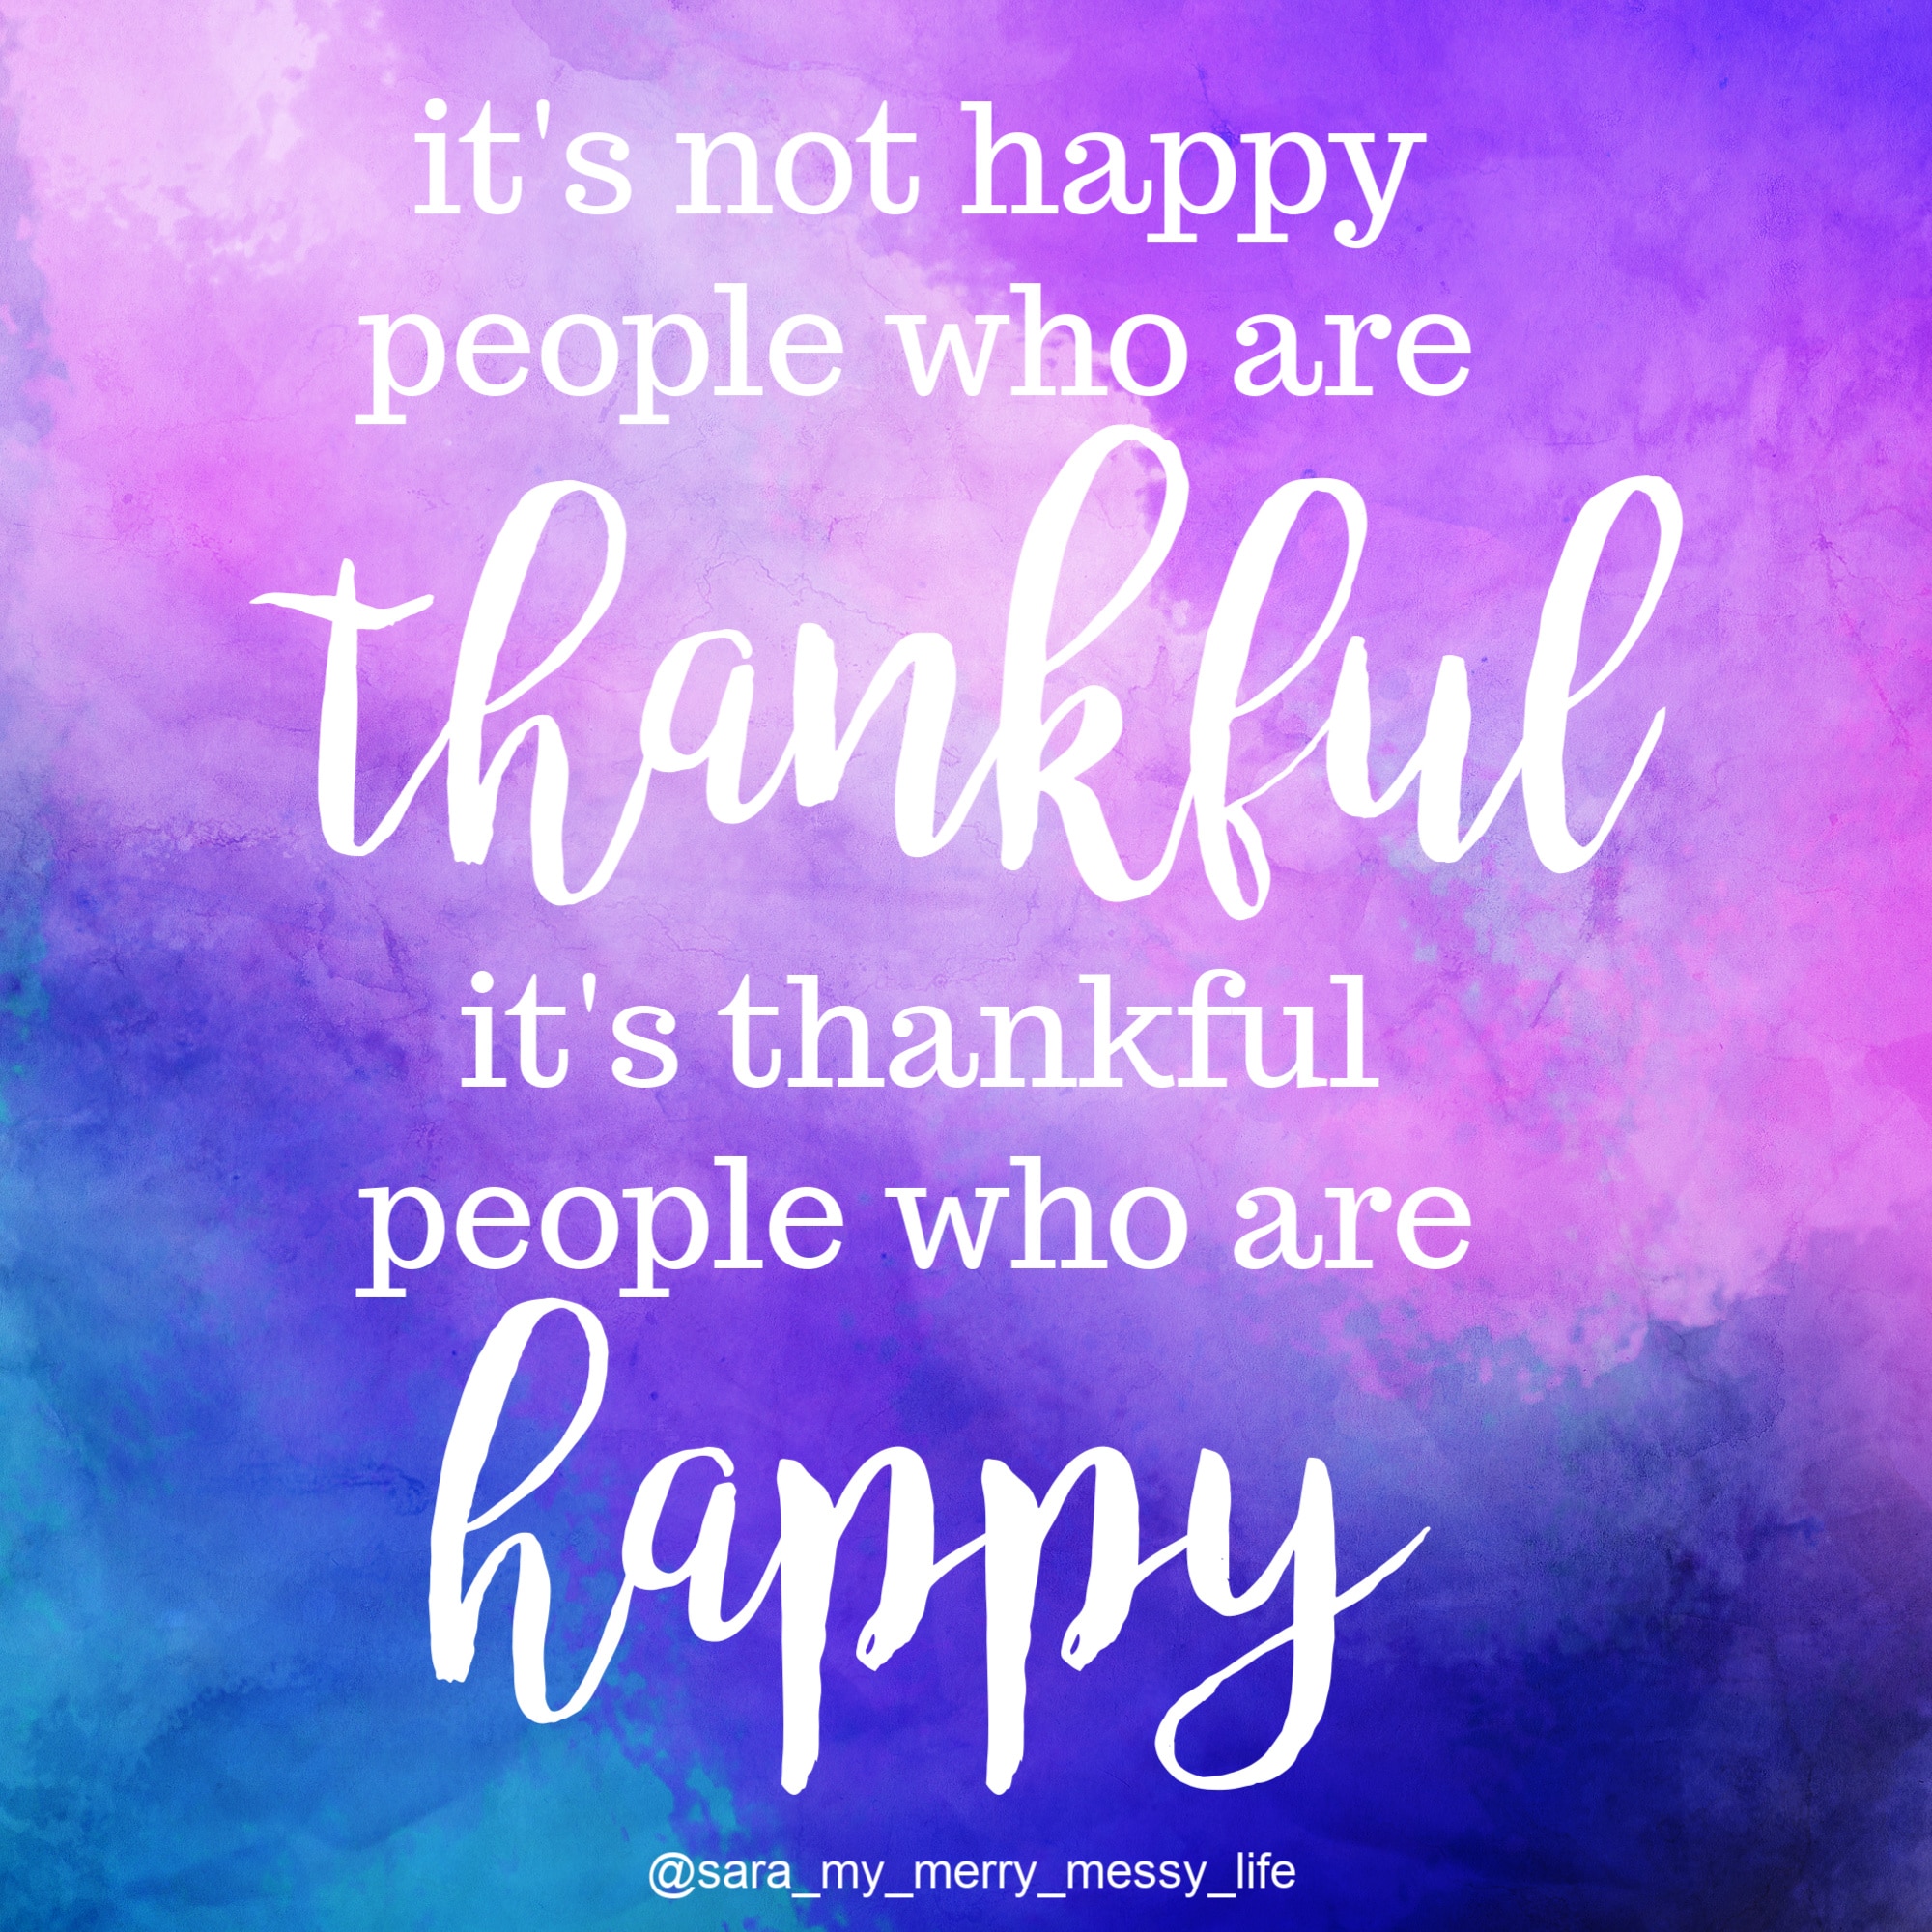 It's not thankful people who are happy, it's happy people who are thankful.